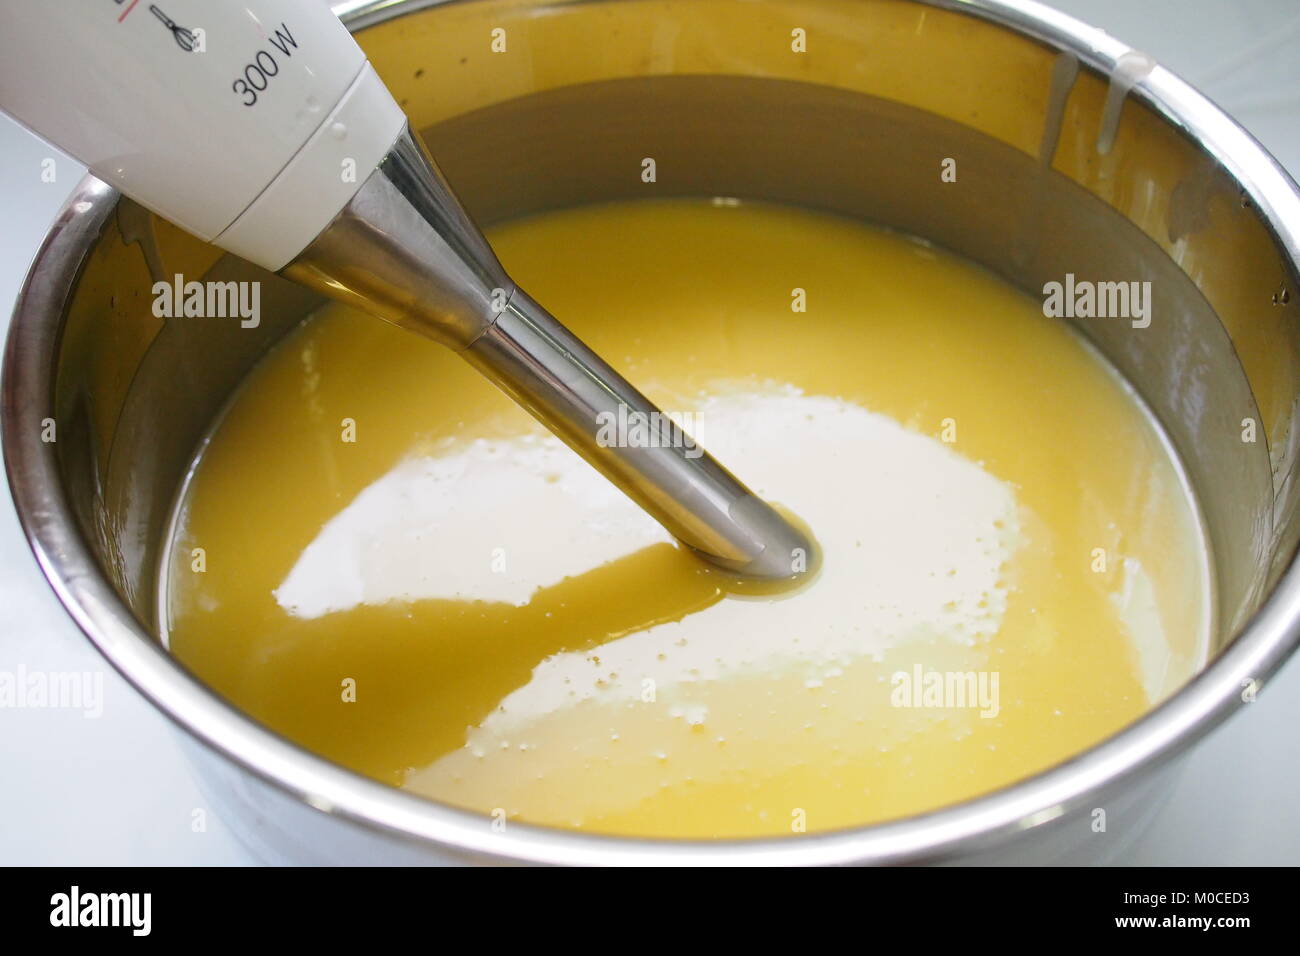 Process of homemade soap with stick blender Stock Photo - Alamy